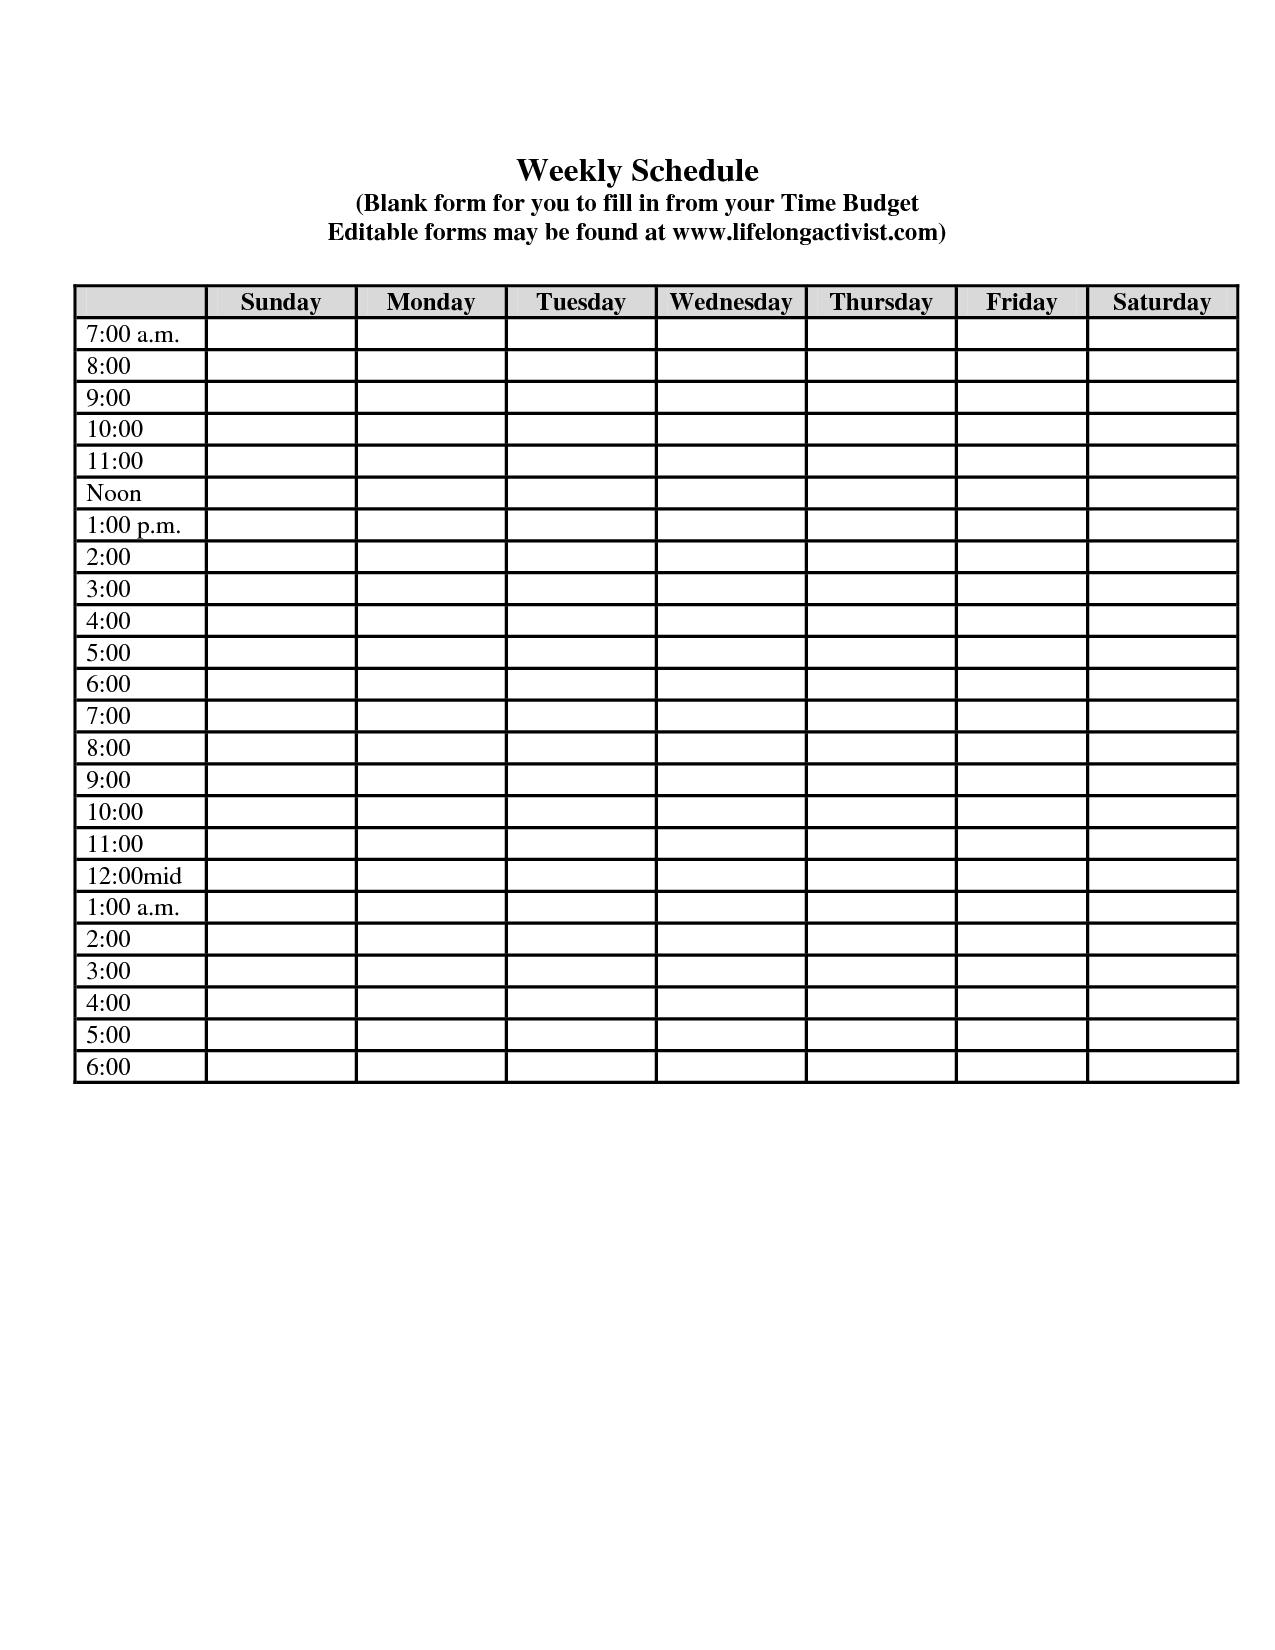 Weekly Employee Schedule Template Pdf - PDF Template